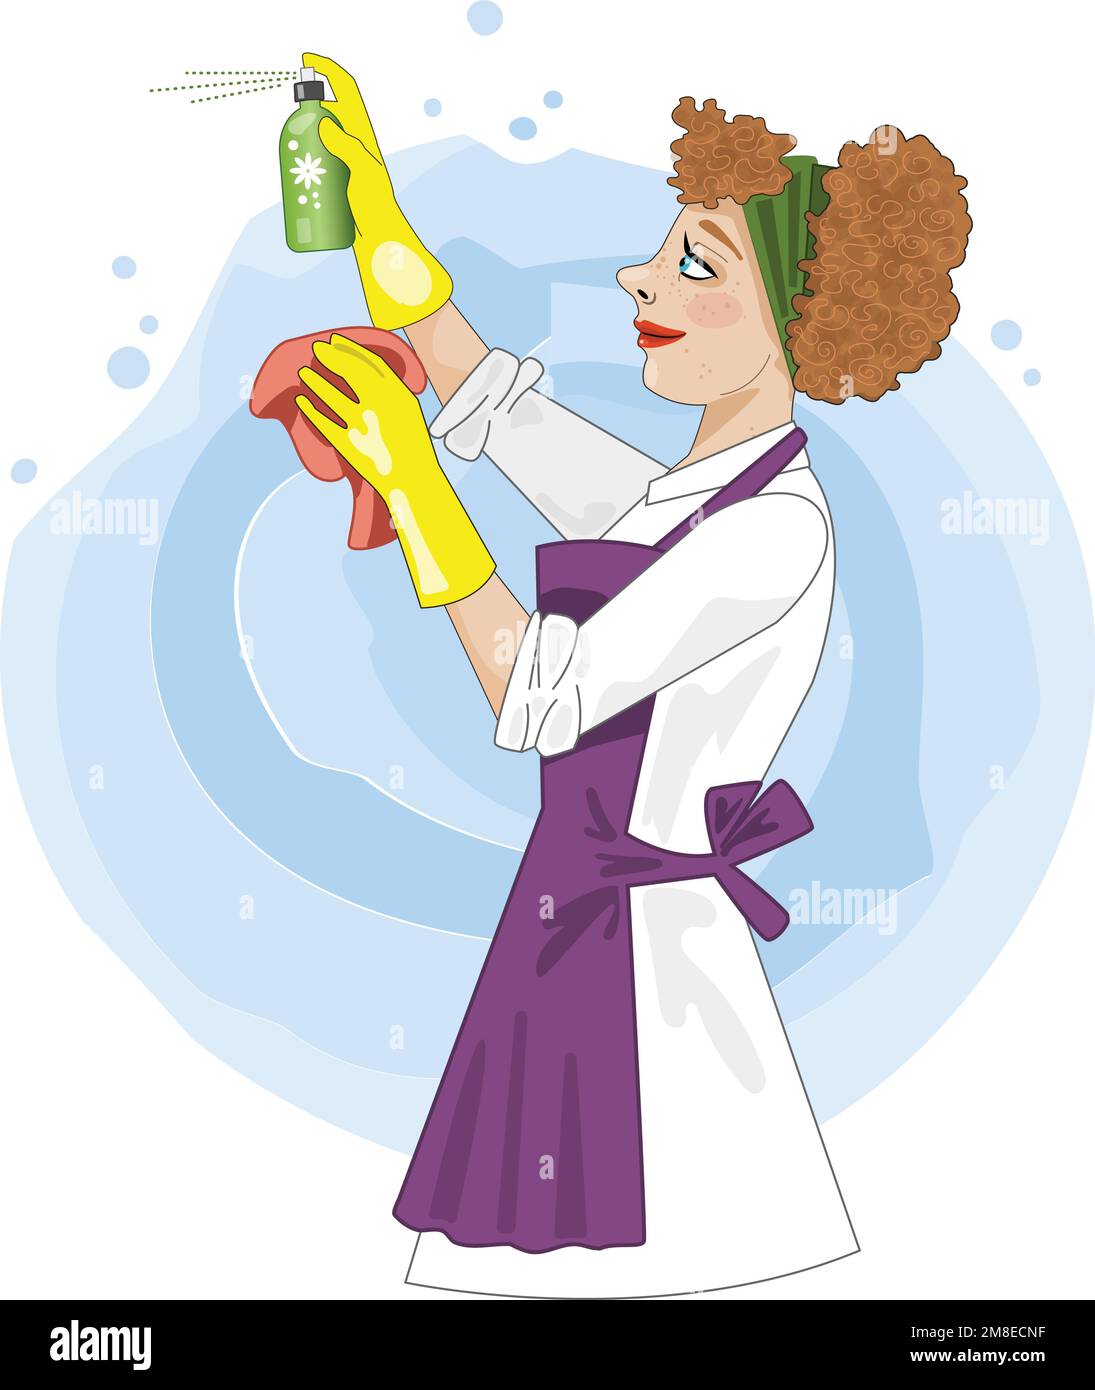 https://c8.alamy.com/comp/2M8ECNF/a-pretty-lady-happily-using-cleaning-products-2M8ECNF.jpg